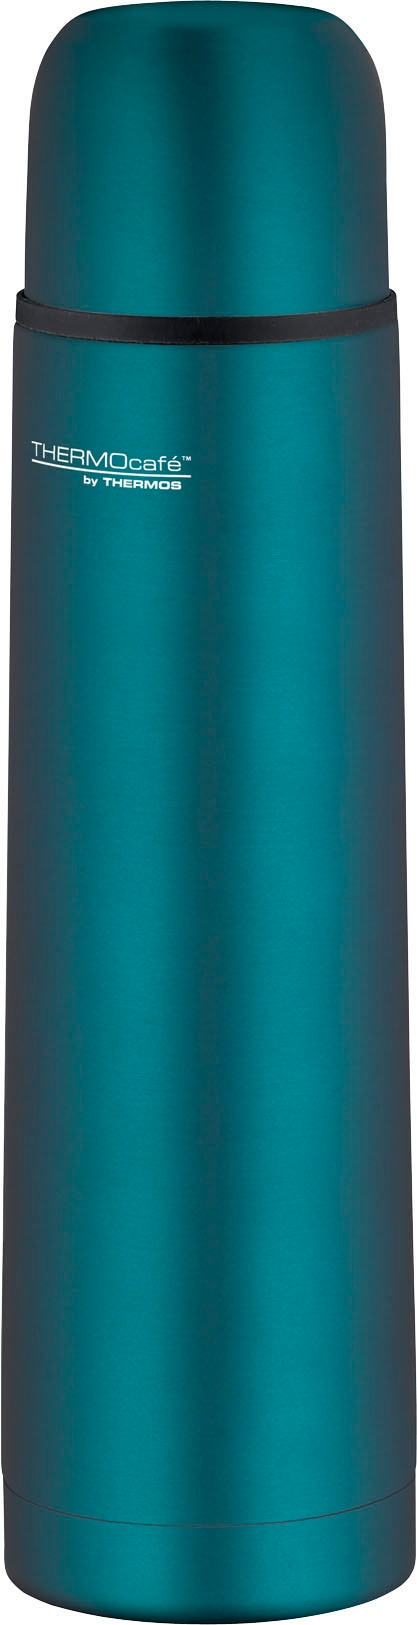 THERMOS Isolierflasche "Everyday"